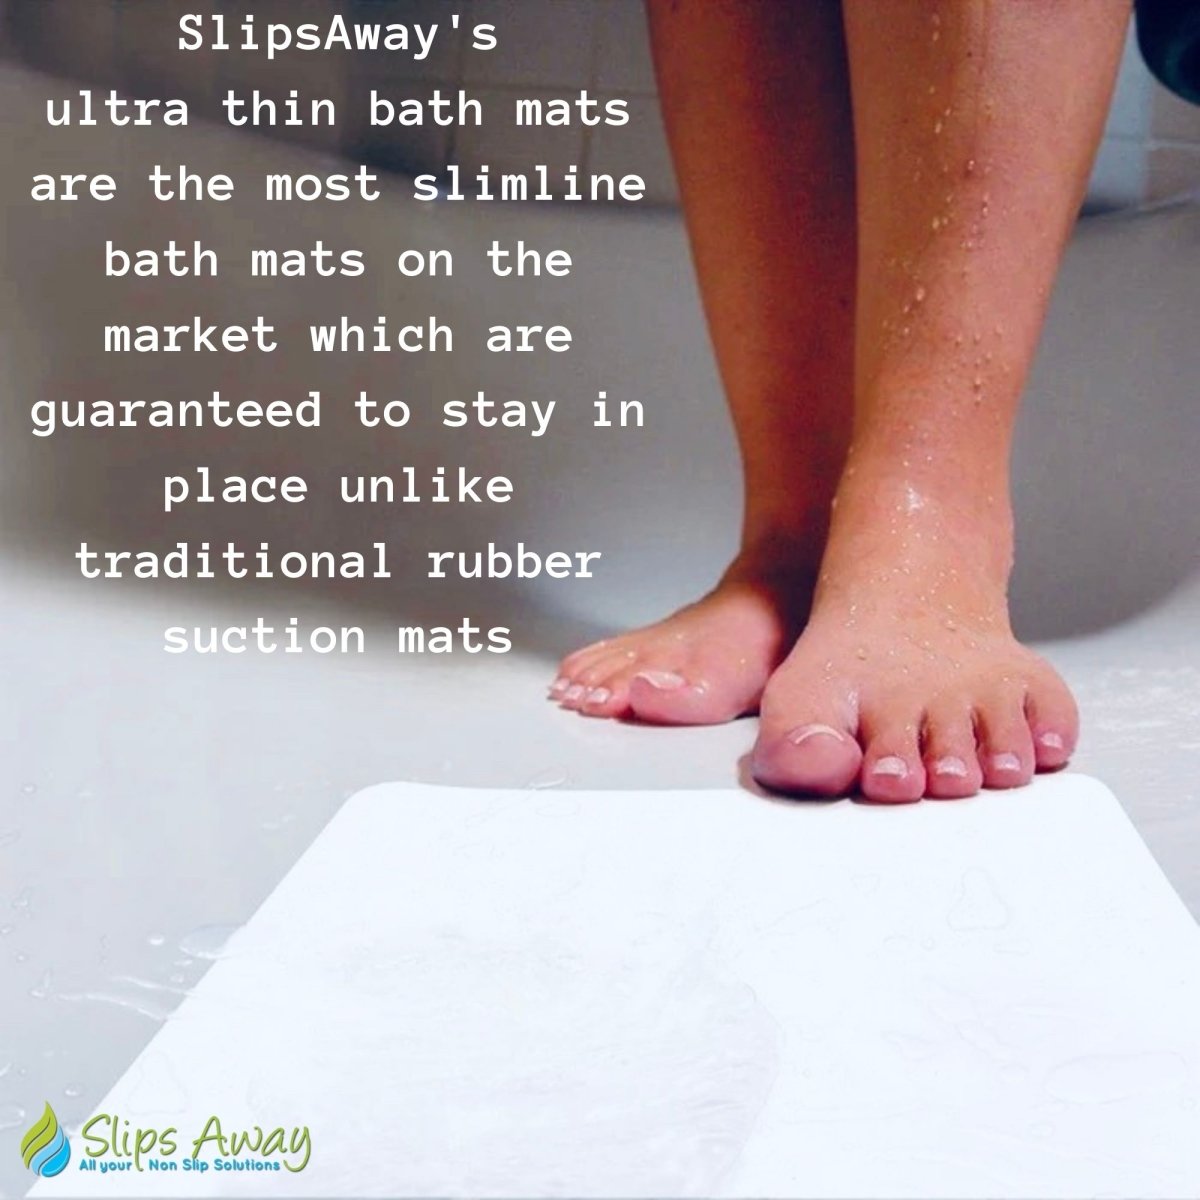 https://cdn.shopify.com/s/files/1/0619/6307/5793/products/ultra-thin-non-slip-adhesive-bath-mat-free-roller-presser-included-sa077-699891.jpg?v=1689691471&width=1200